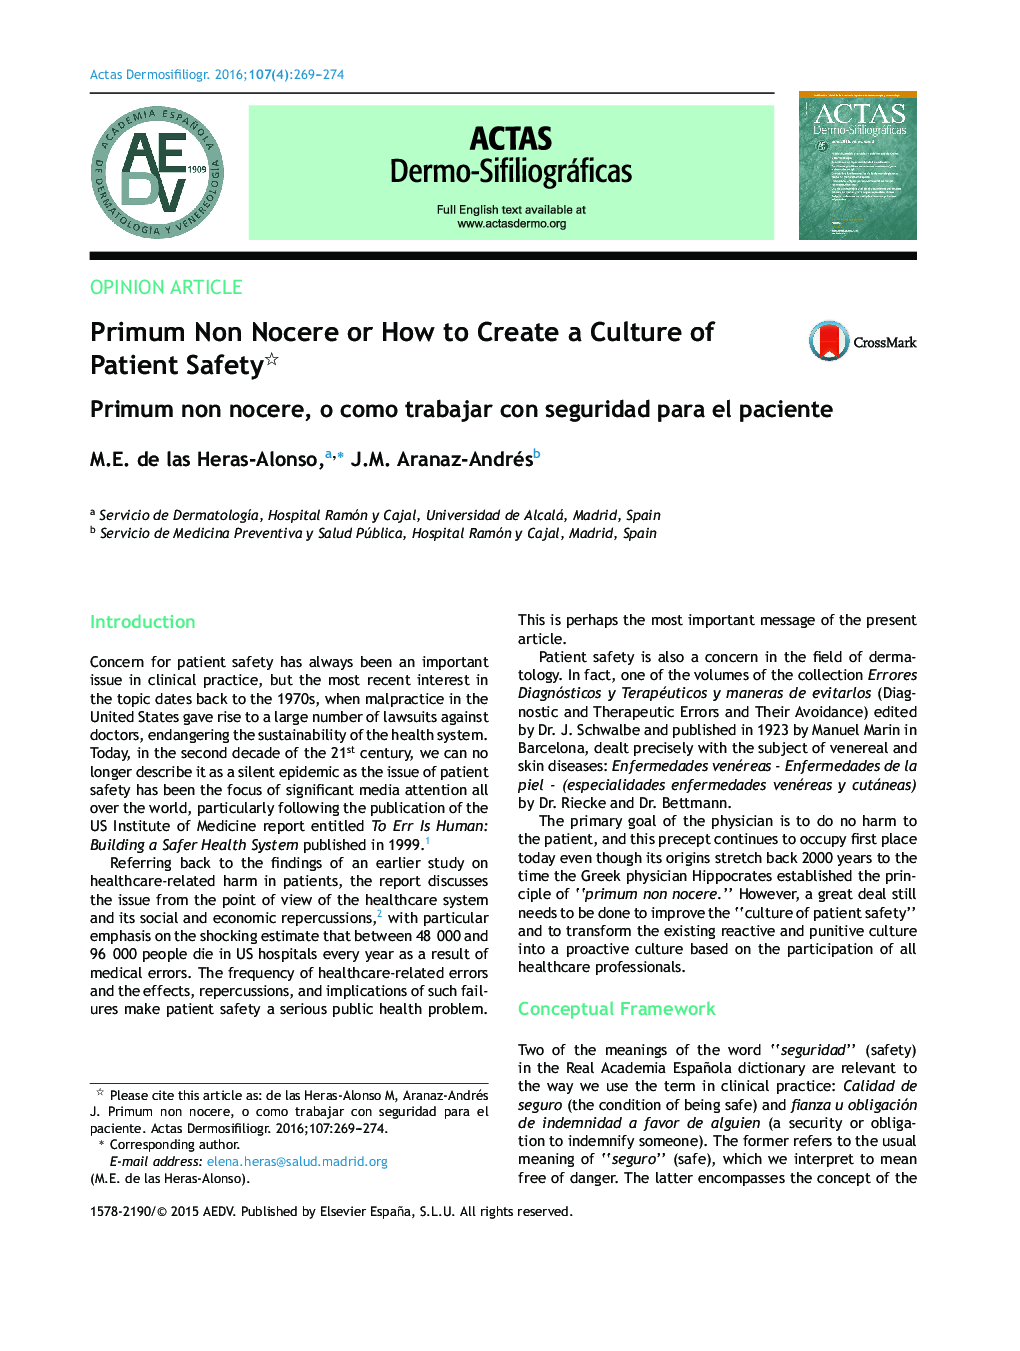 Primum Non Nocere or How to Create a Culture of Patient Safety